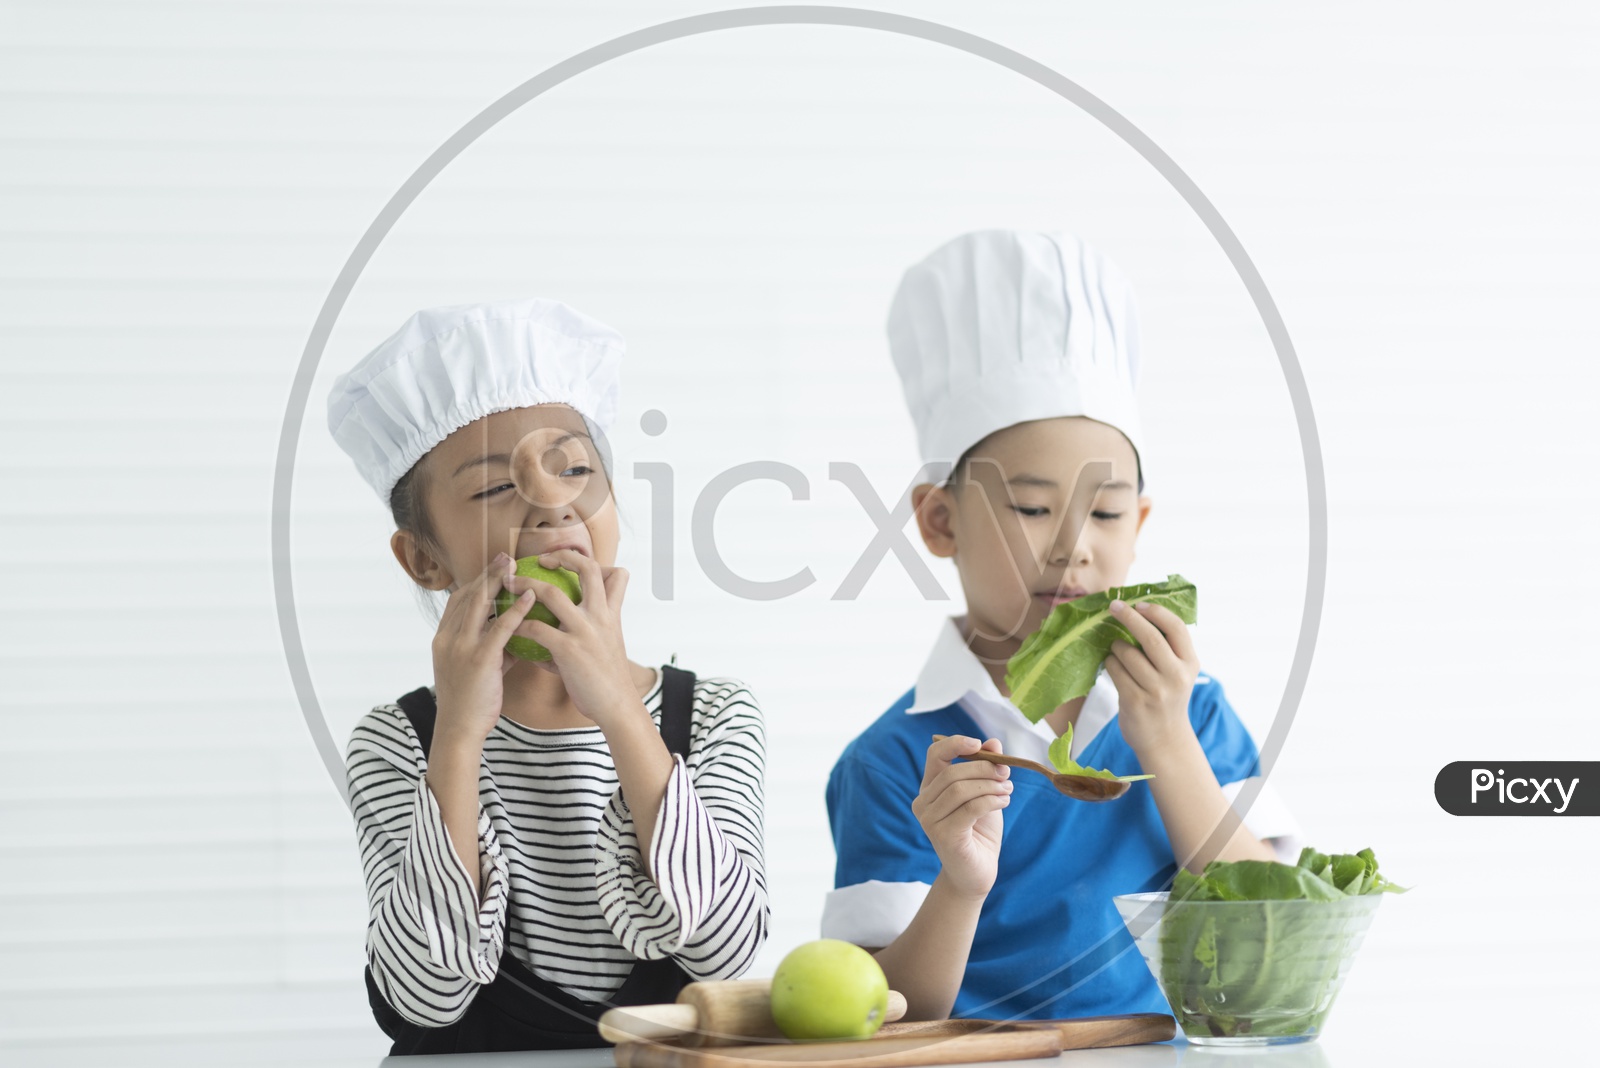 Boys as chefs enjoying cooking with vegetables  in hand